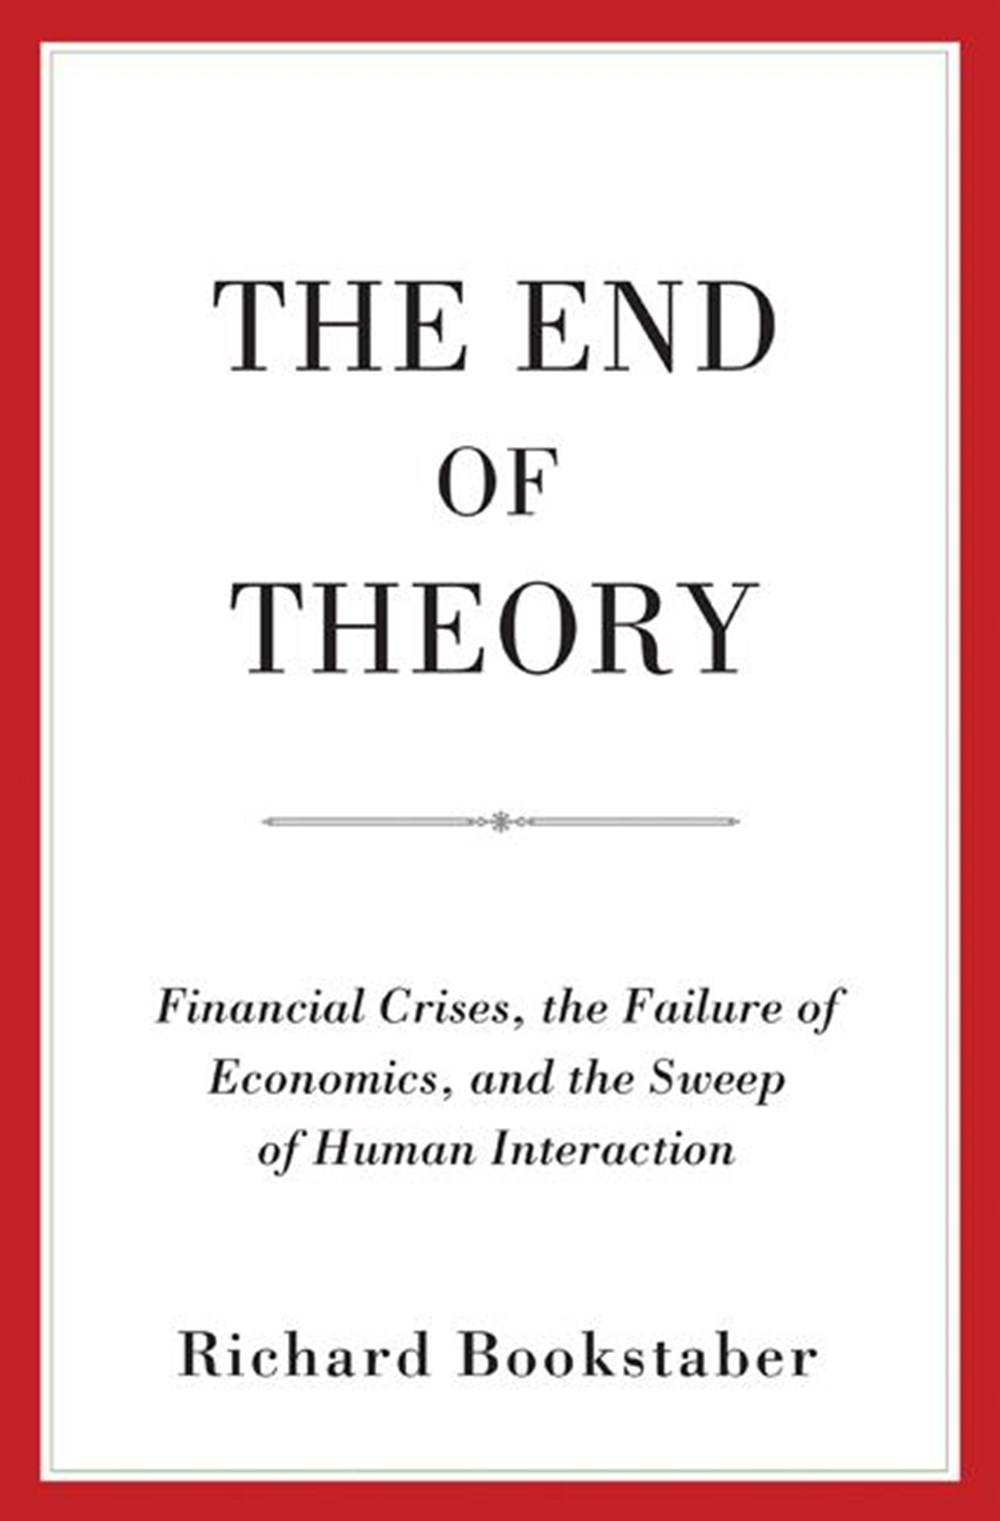 End of Theory Financial Crises, the Failure of Economics, and the Sweep of Human Interaction